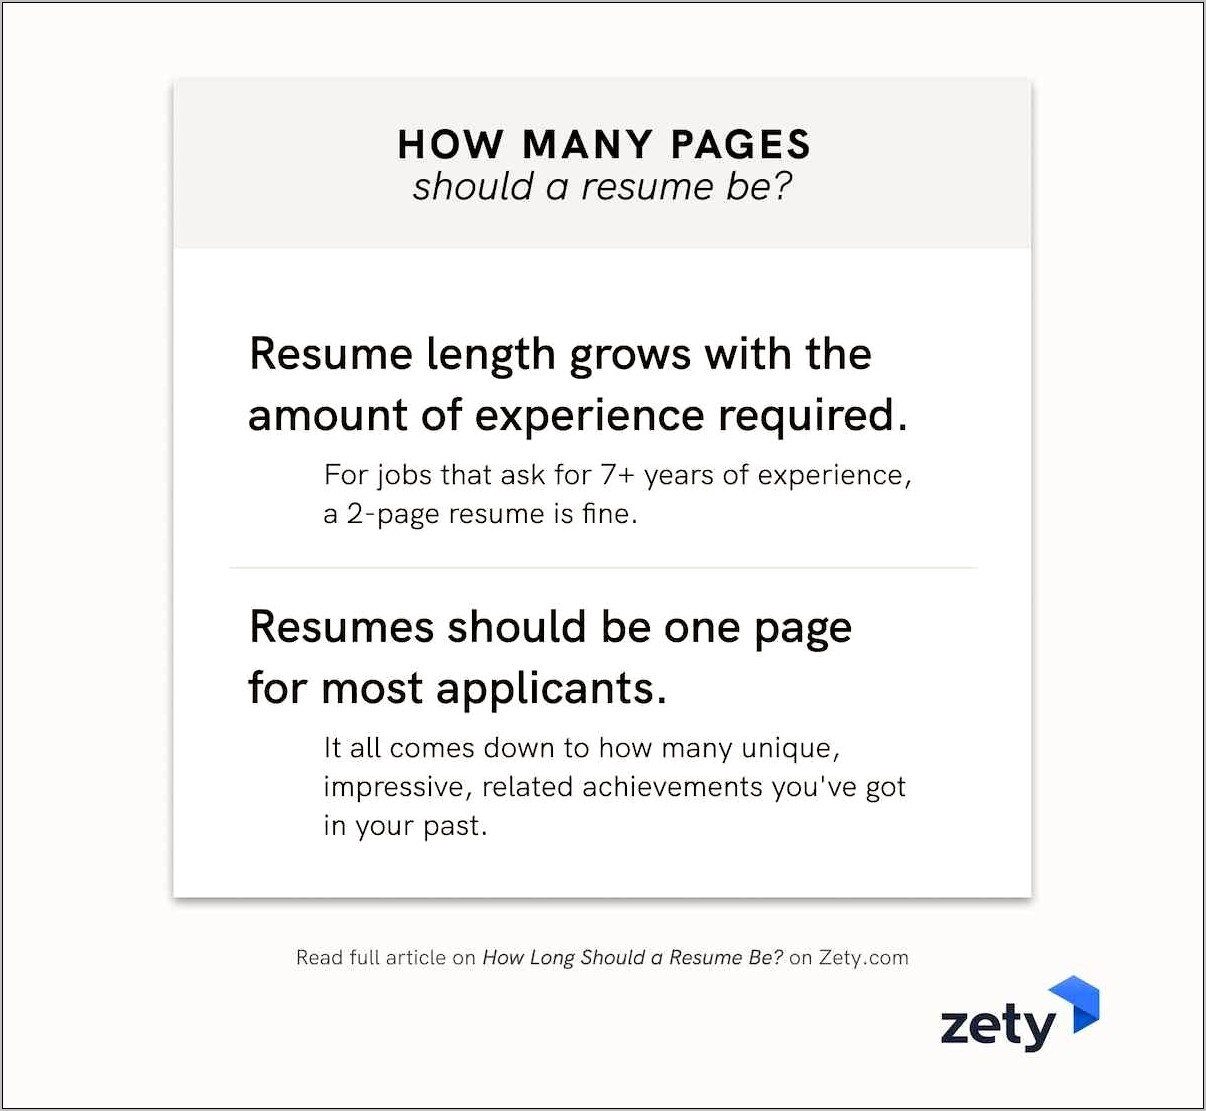 Do Jobs Keep Old Resumes On Sites